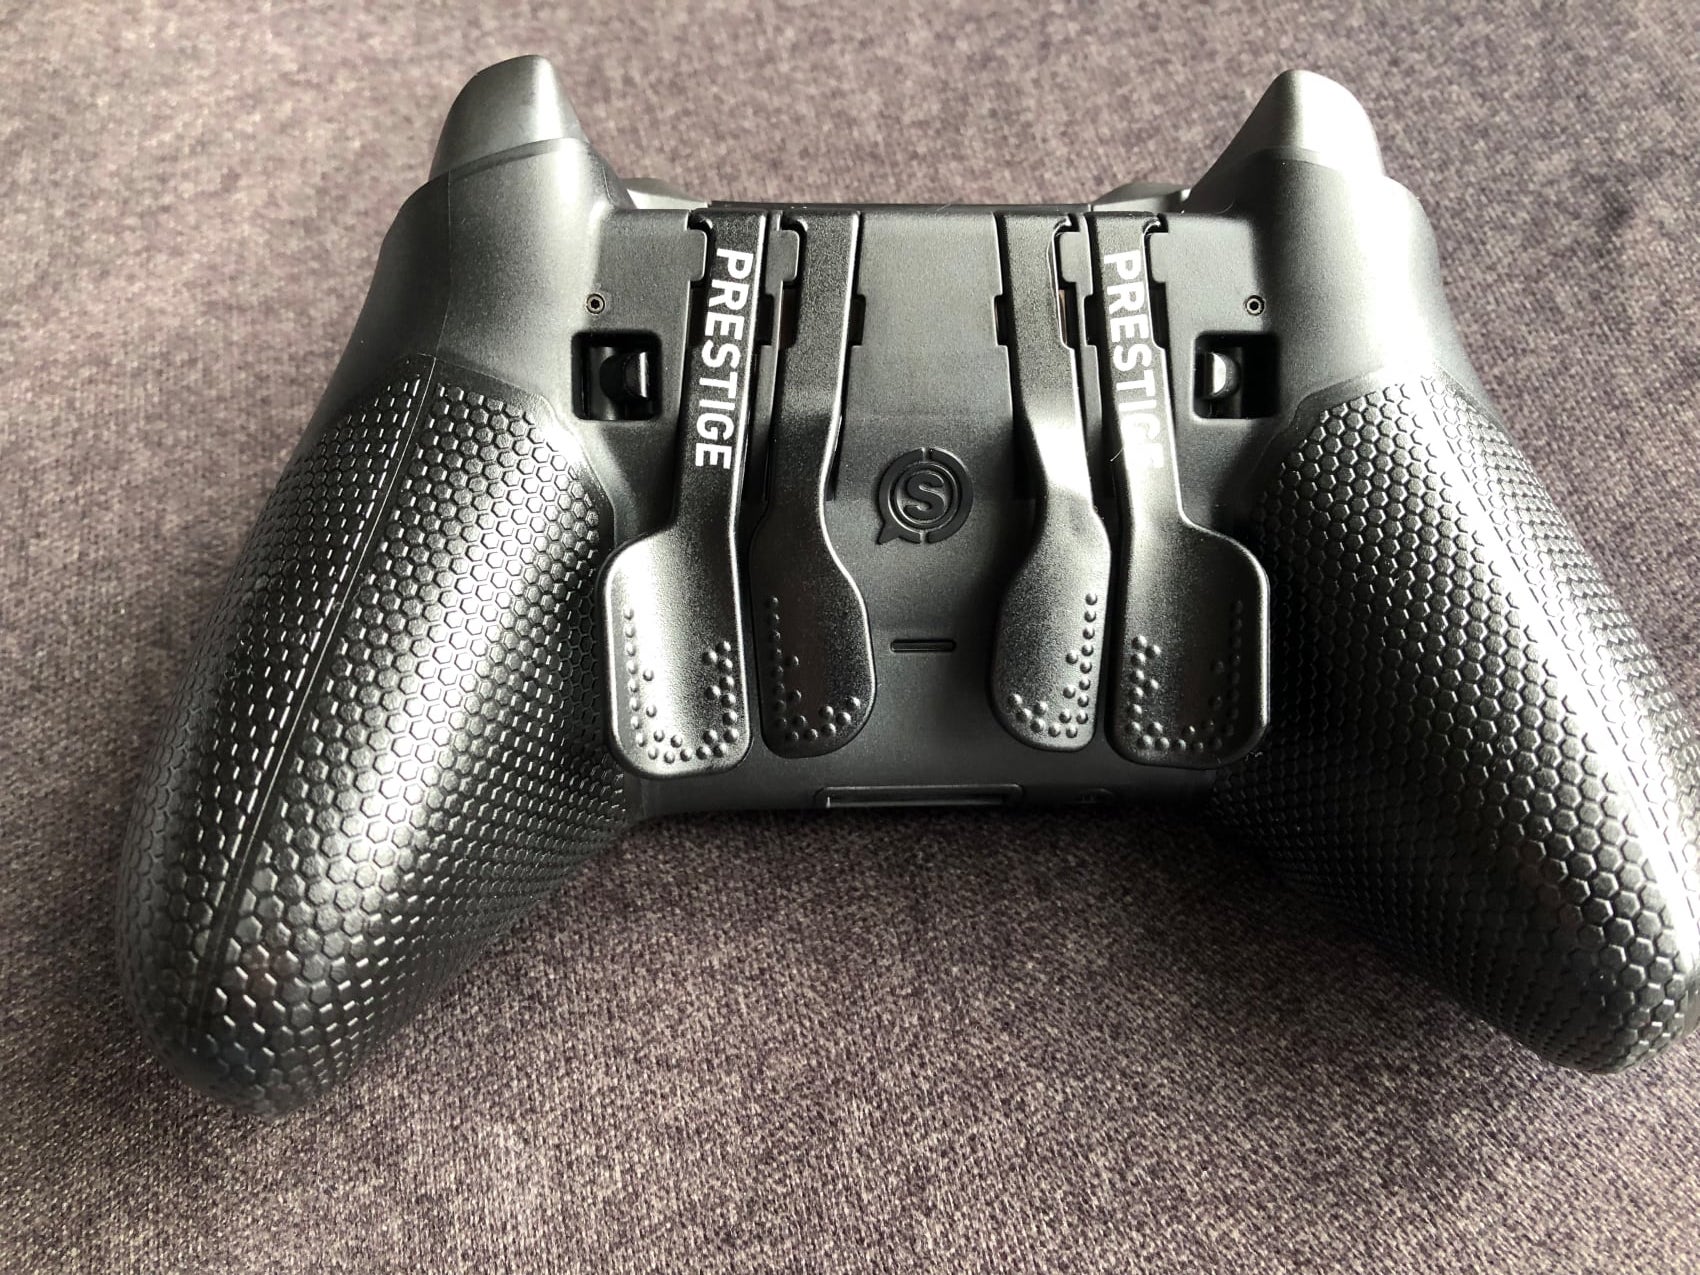 Scuf Prestige: An Xbox One Pro Controller Fails to Compete | Digital Trends